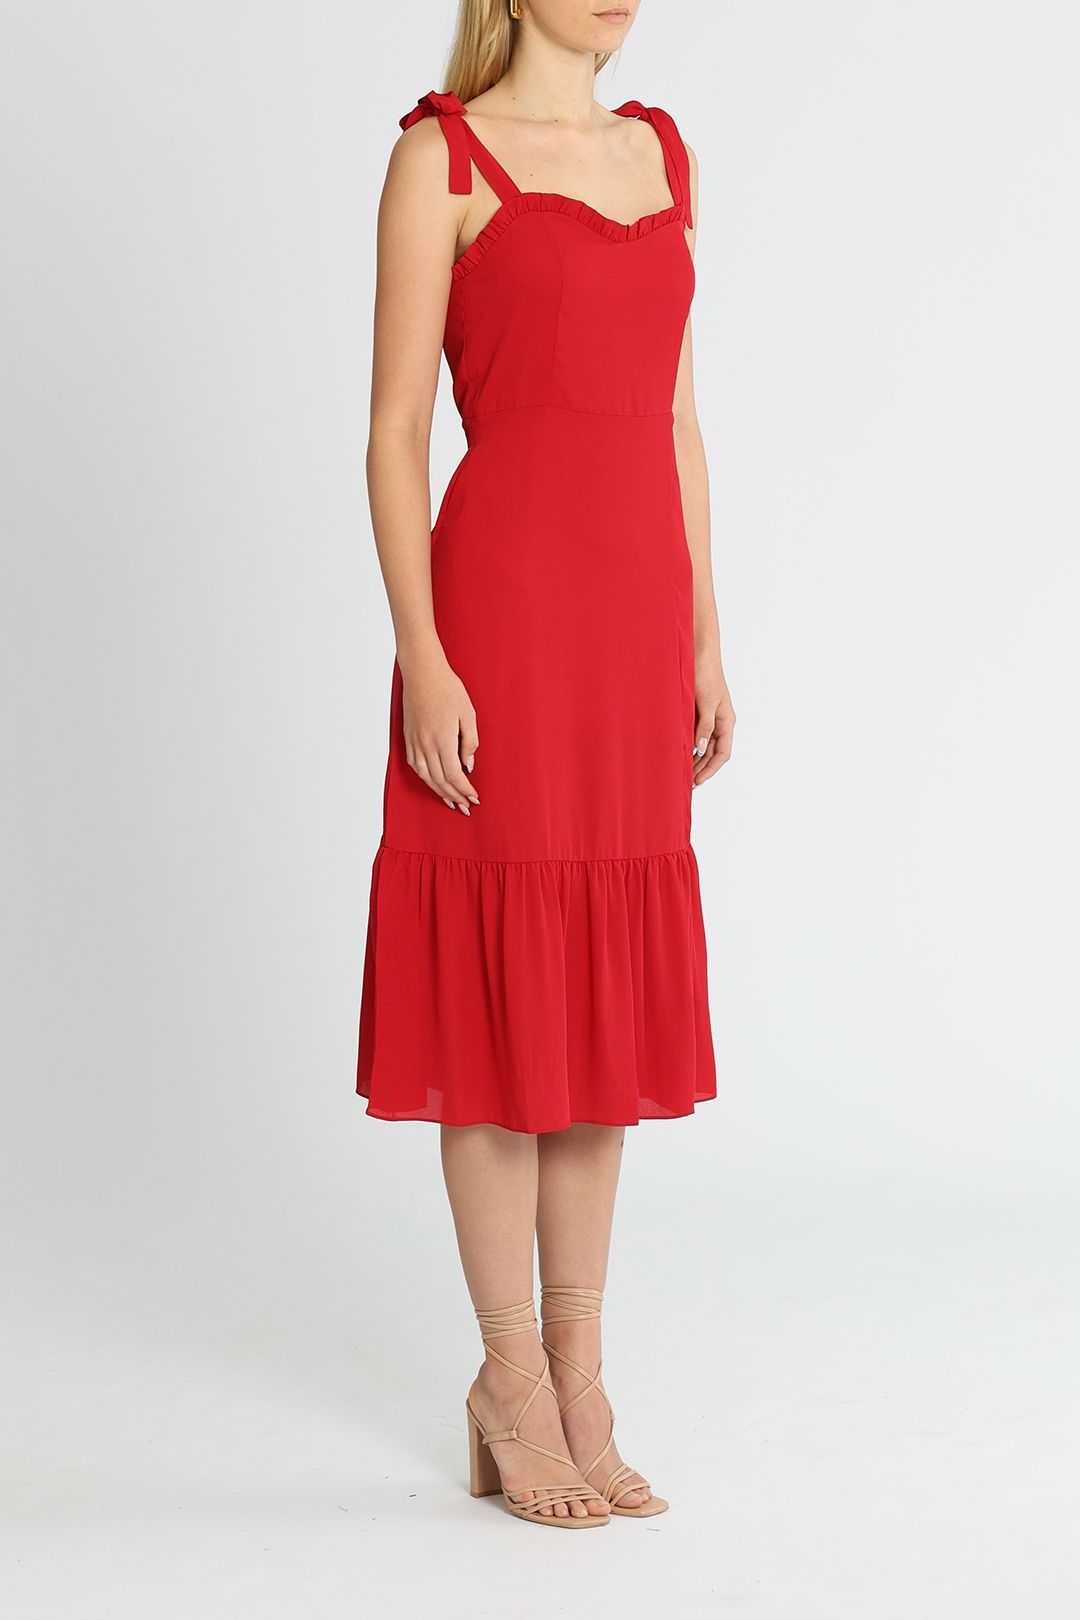 Belle and Bloom Summer Storm Midi Dress Red Ruffles